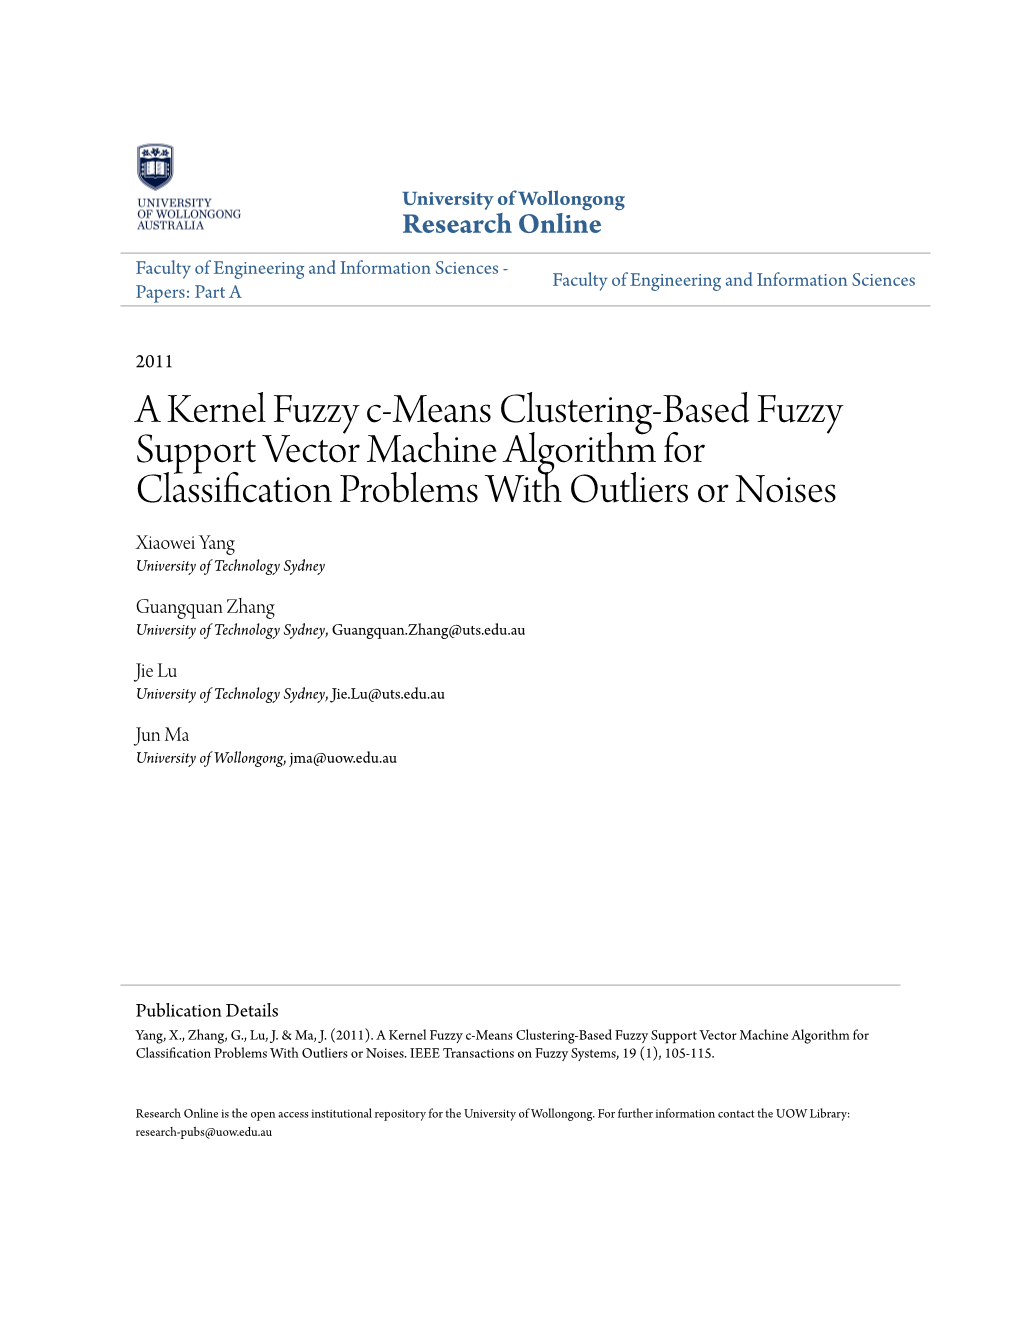 A Kernel Fuzzy C-Means Clustering-Based Fuzzy Support Vector Machine Algorithm for Classification Problems with Outliers Or Nois